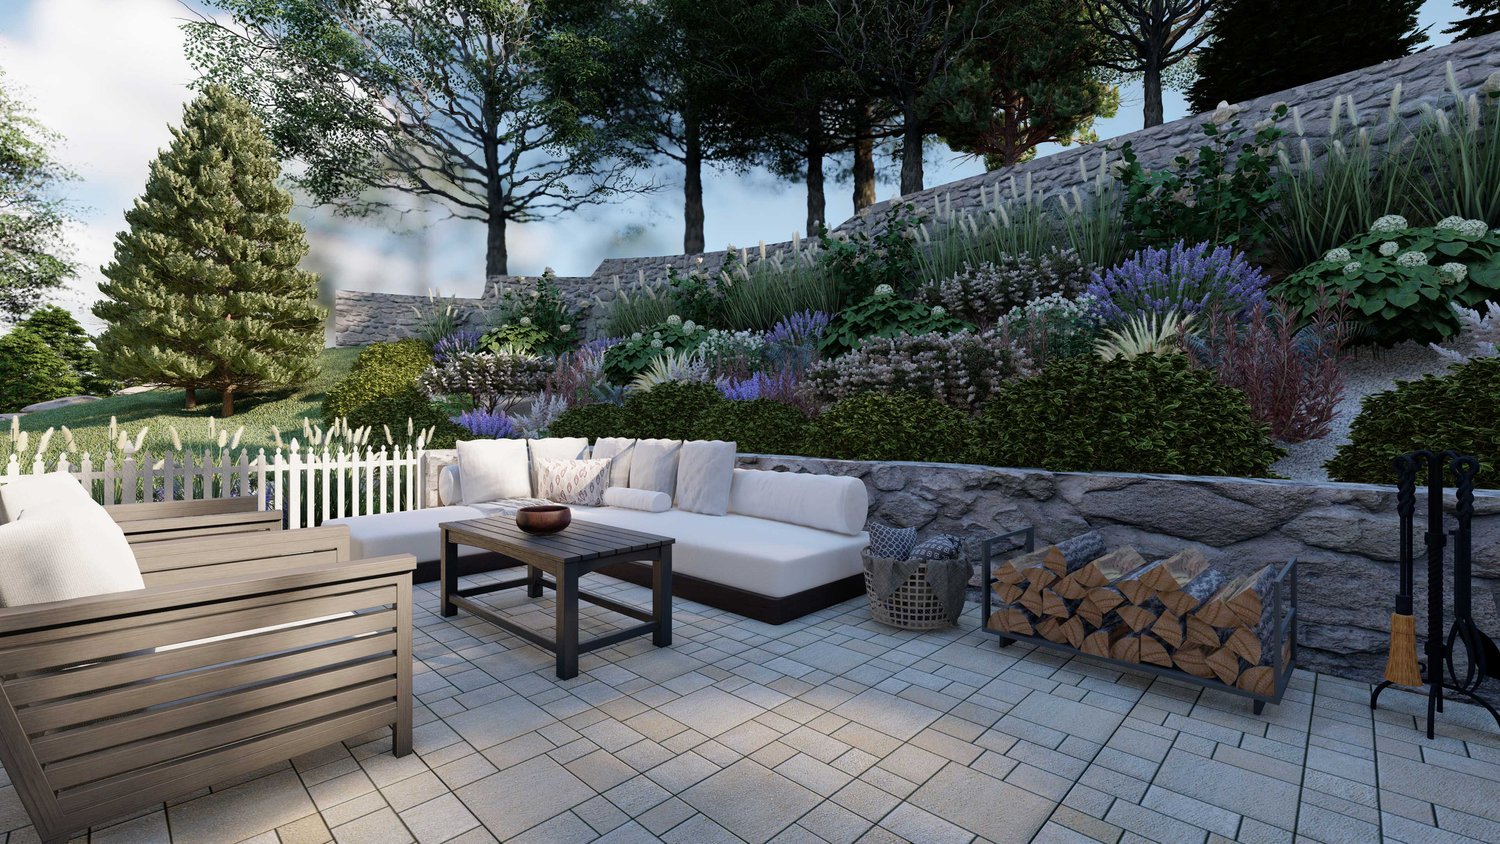 New Canaan backyard with paver and patio with plants in the surroundings enclosed in a stone fence